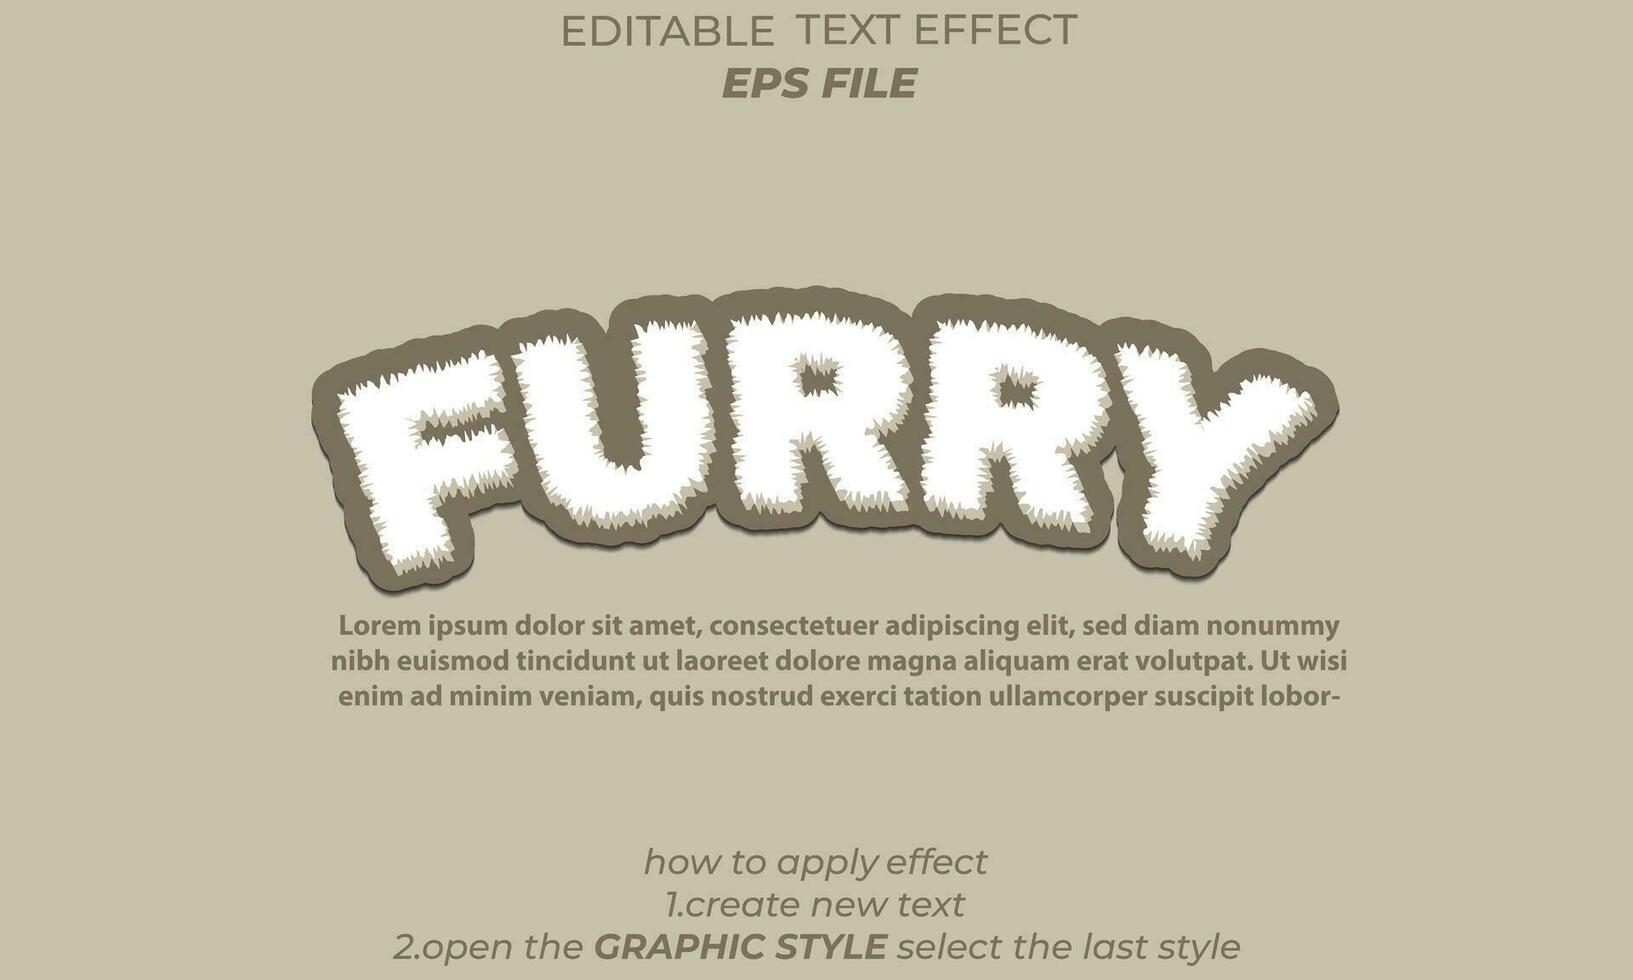 furry text effect, font editable, typography, 3d text. vector template